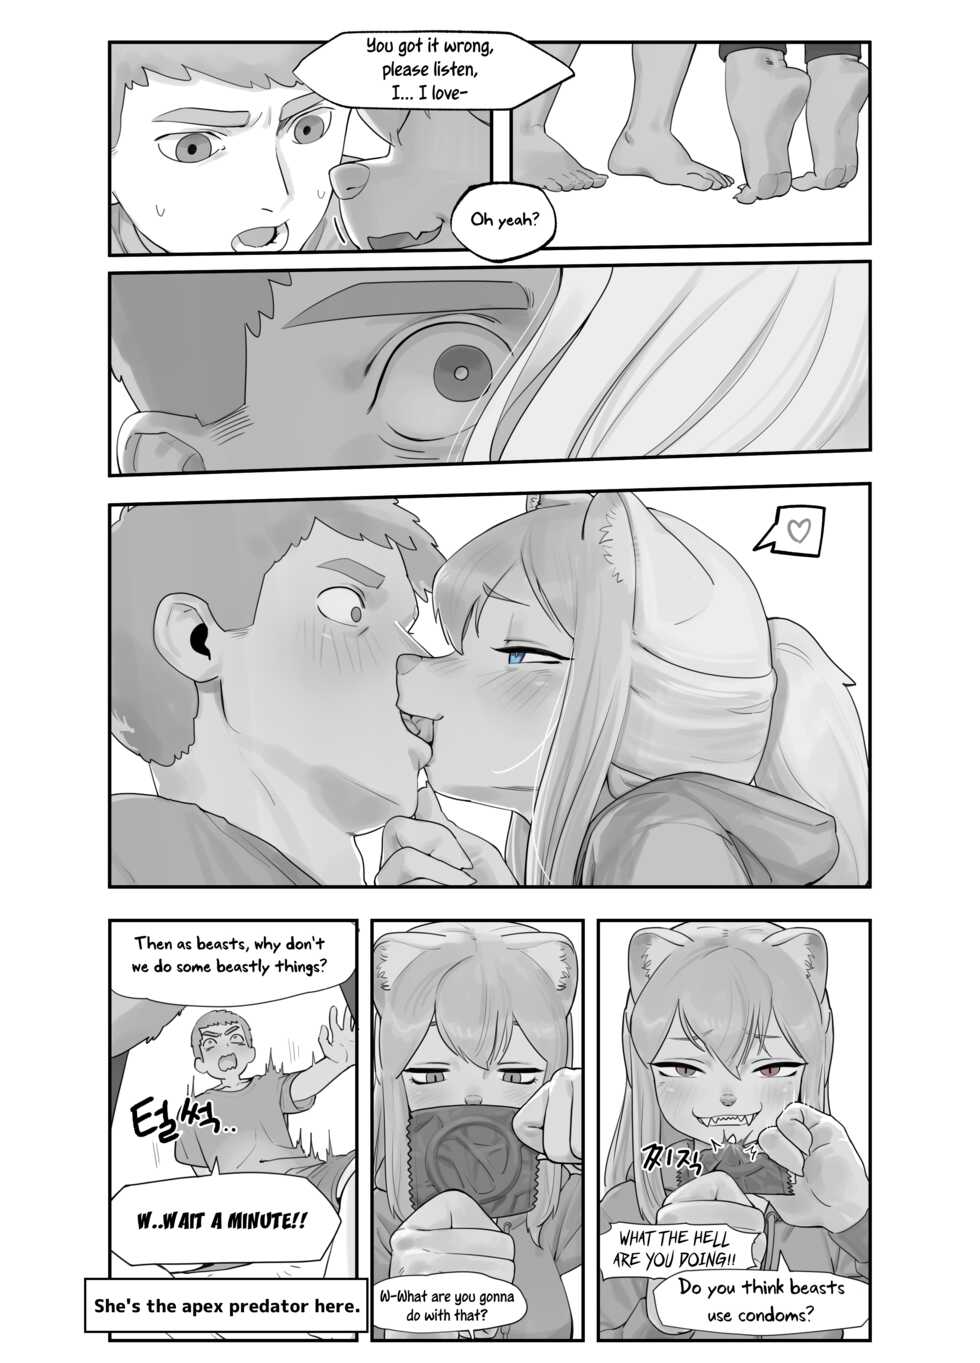 [Gudl] A Suspiciously Erotic Childhood Friend [English] [Uncle Bane] - Page 4